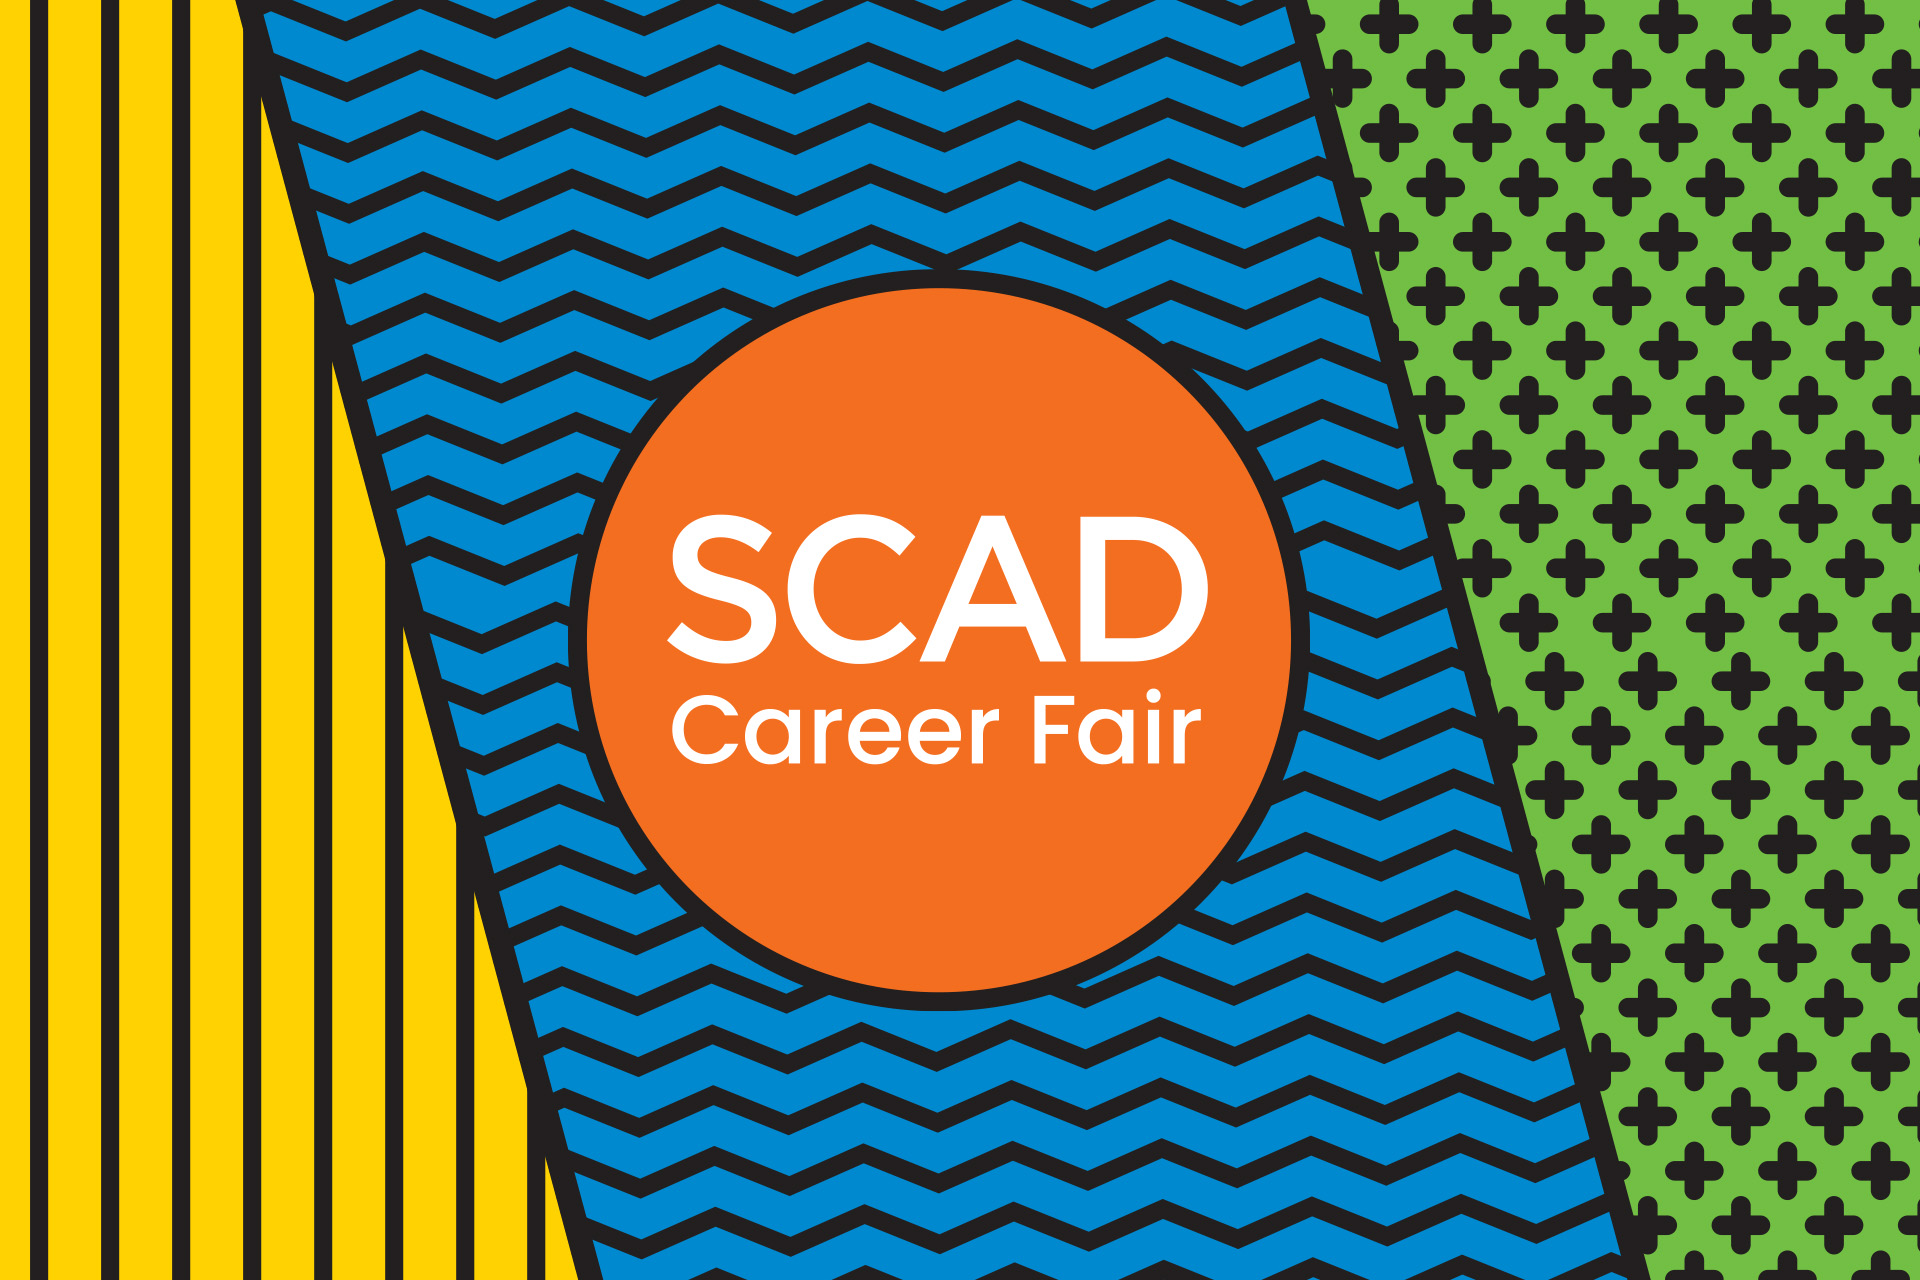 industry connections with top company reps at virtual SCAD Career